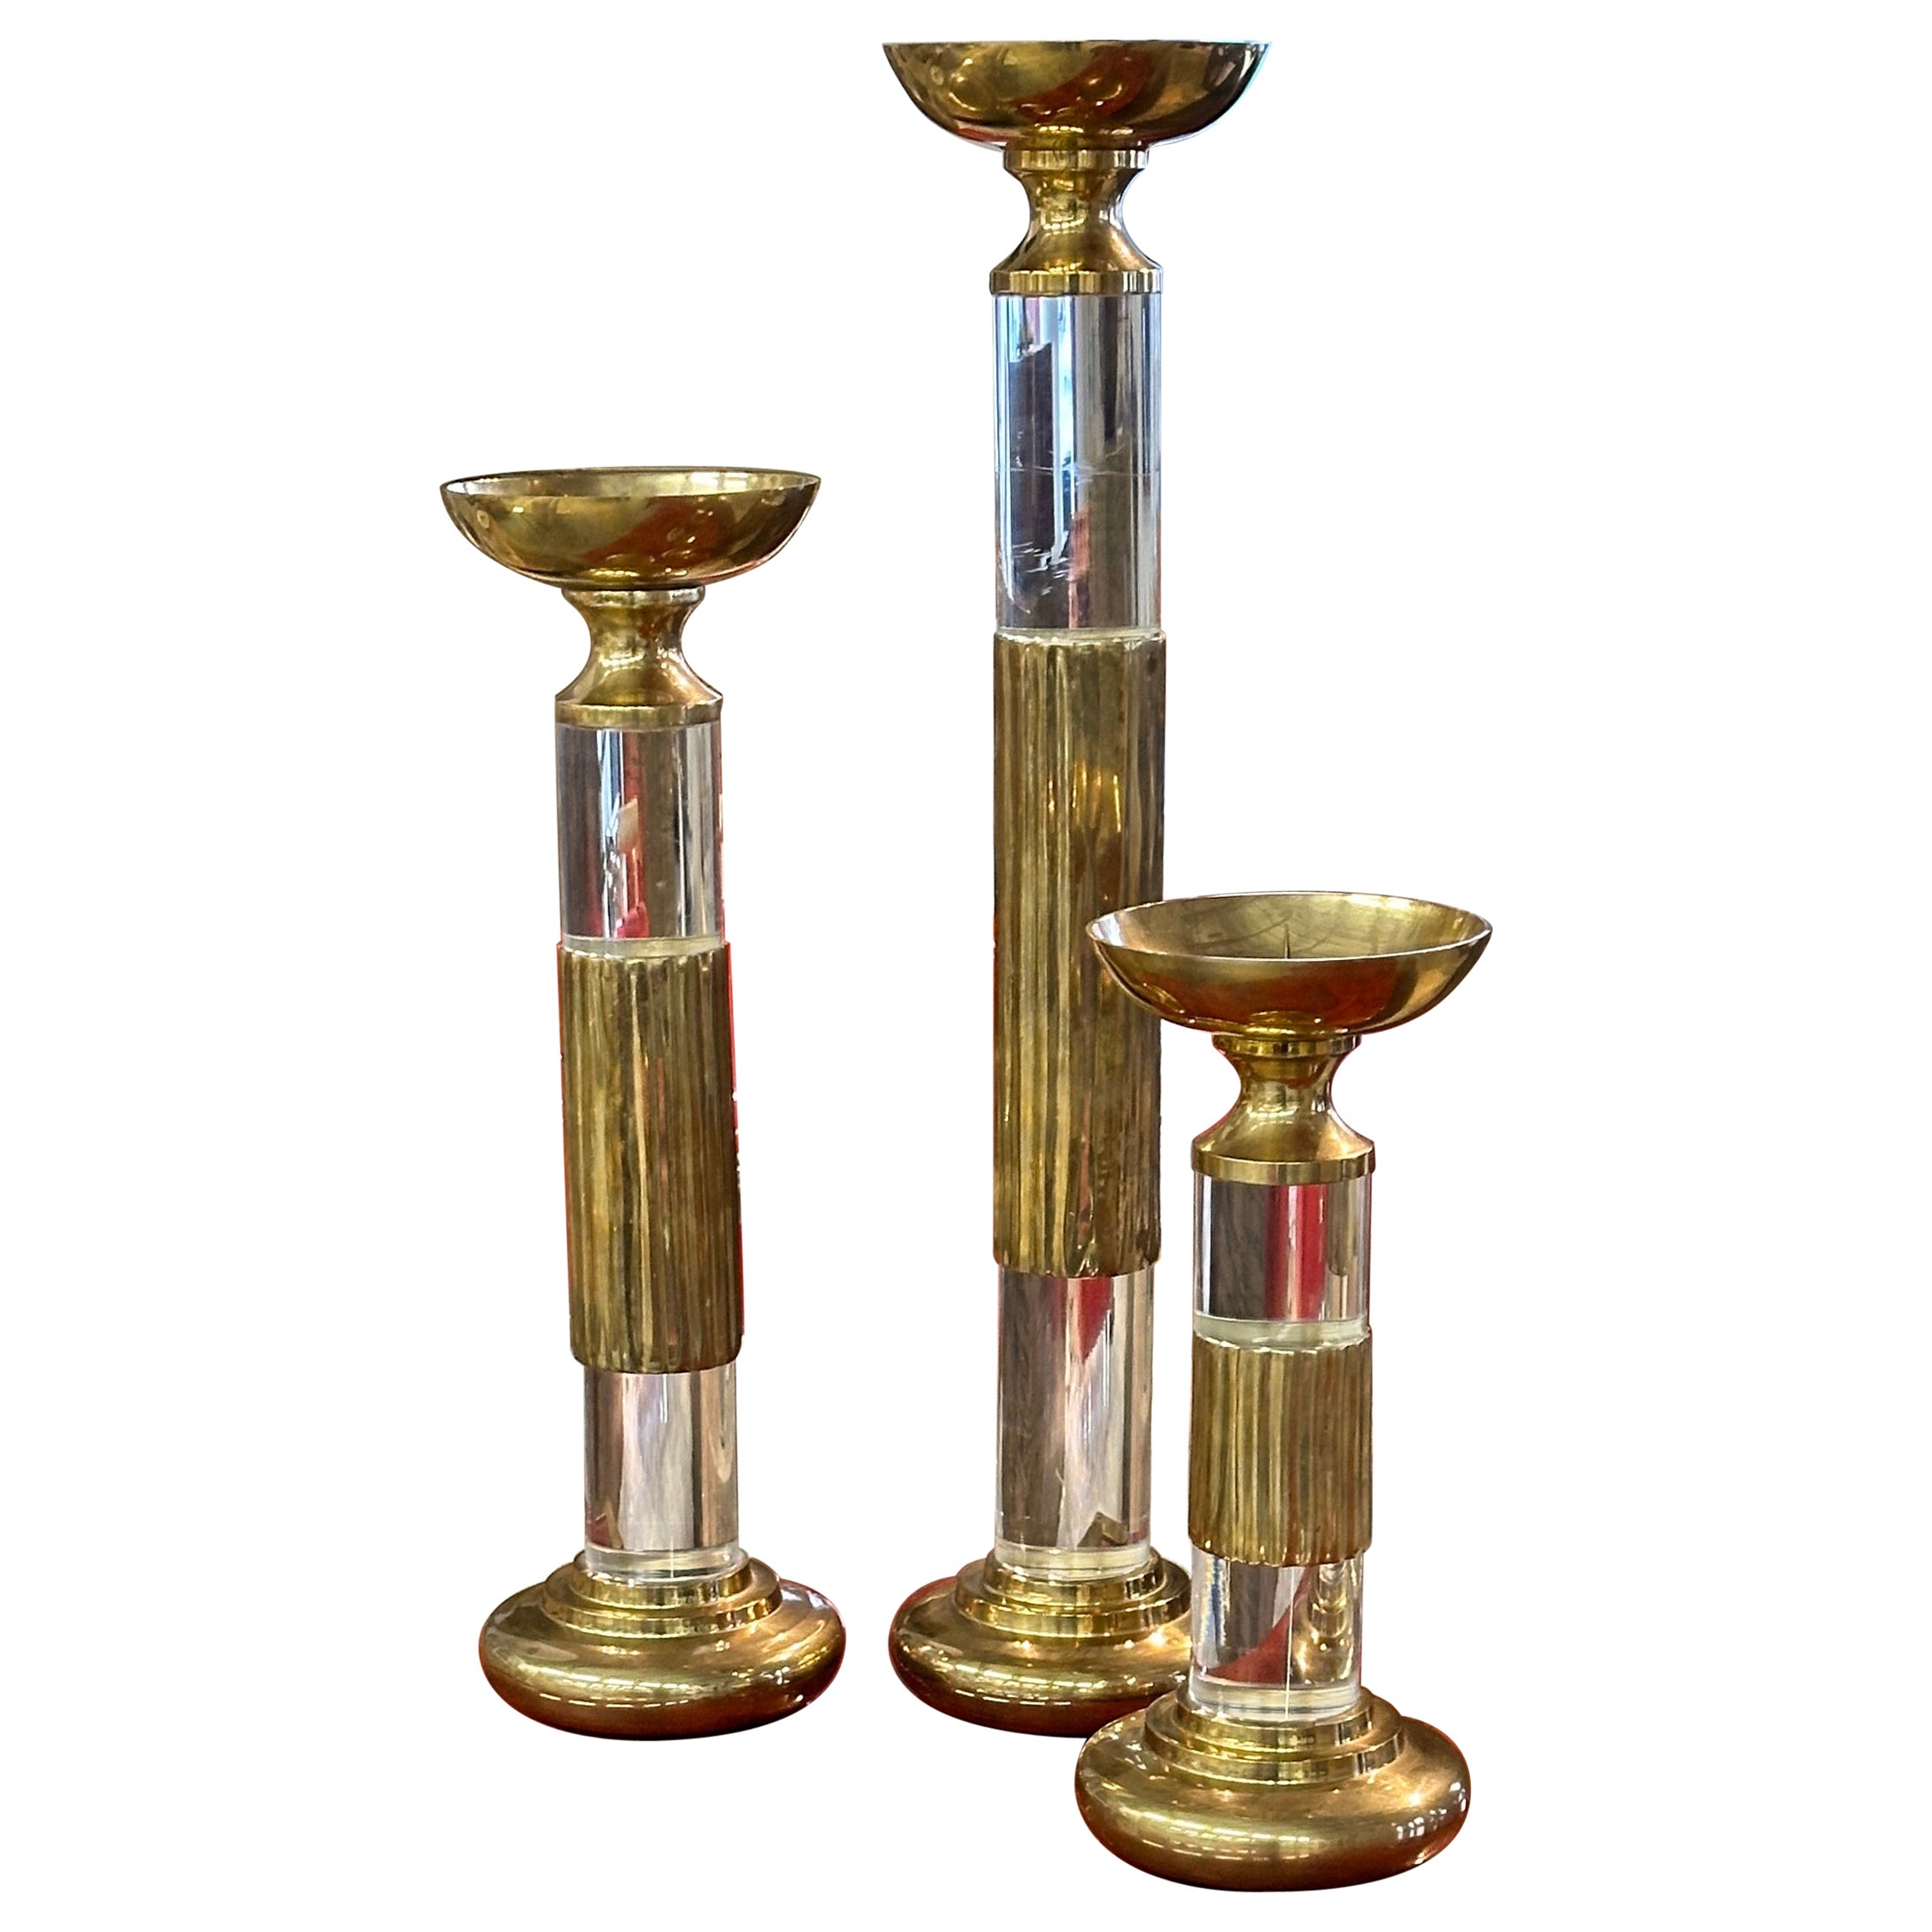 Lucite and Brass Candlestick Prickets Attributed to Dolbi and Cashier 